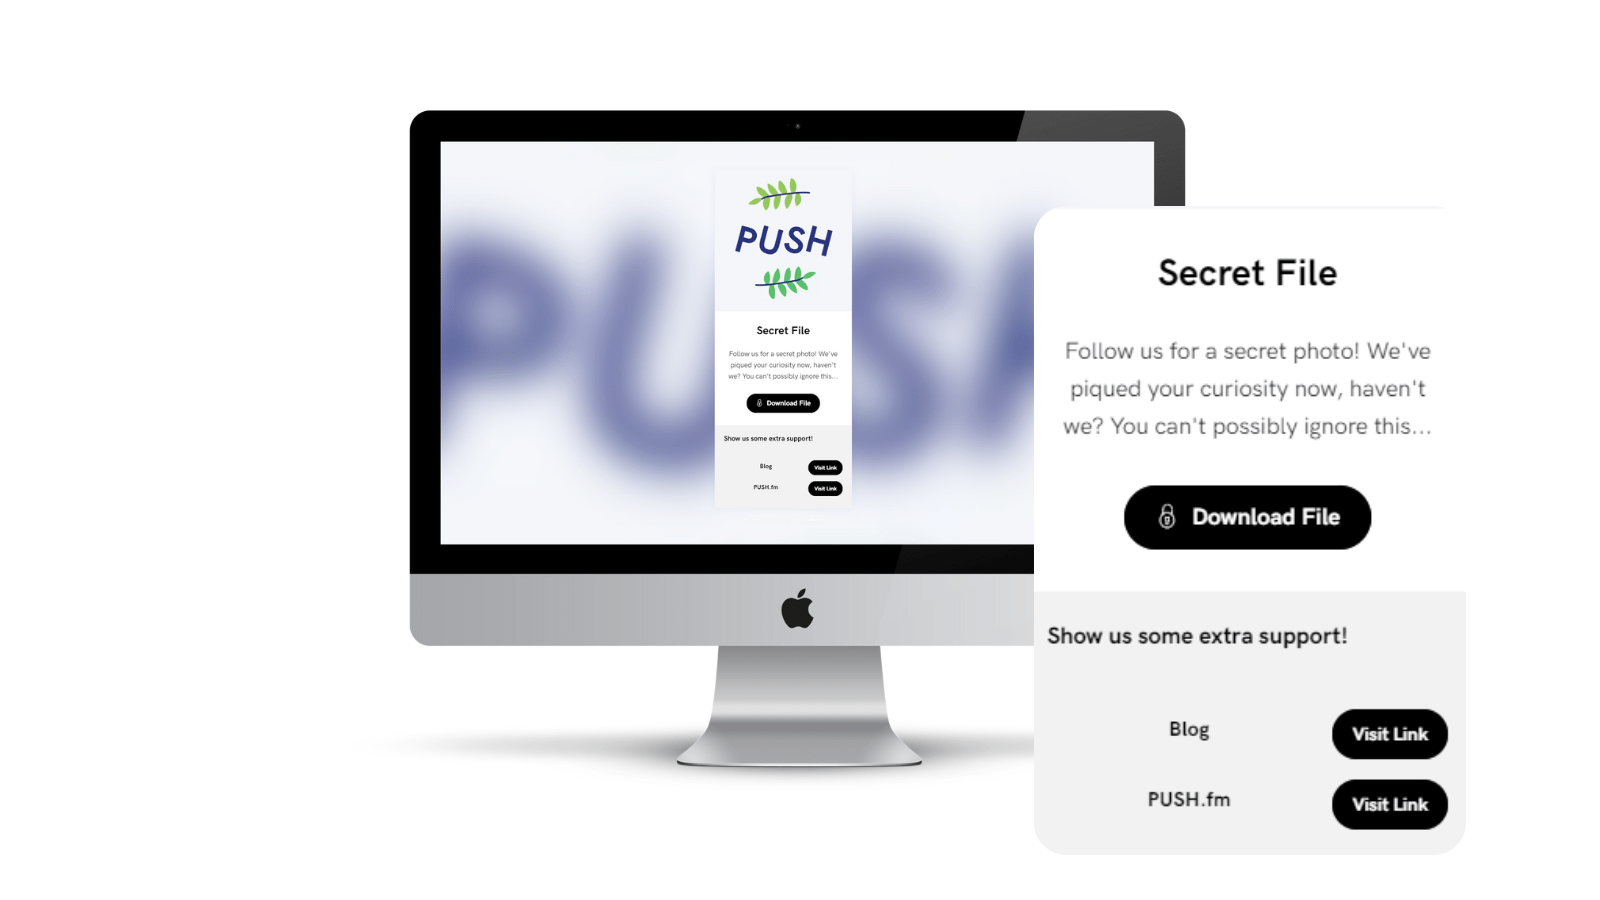 PUSH.fm – Reward Links: Reward your fans and yourself with this free marketing tool